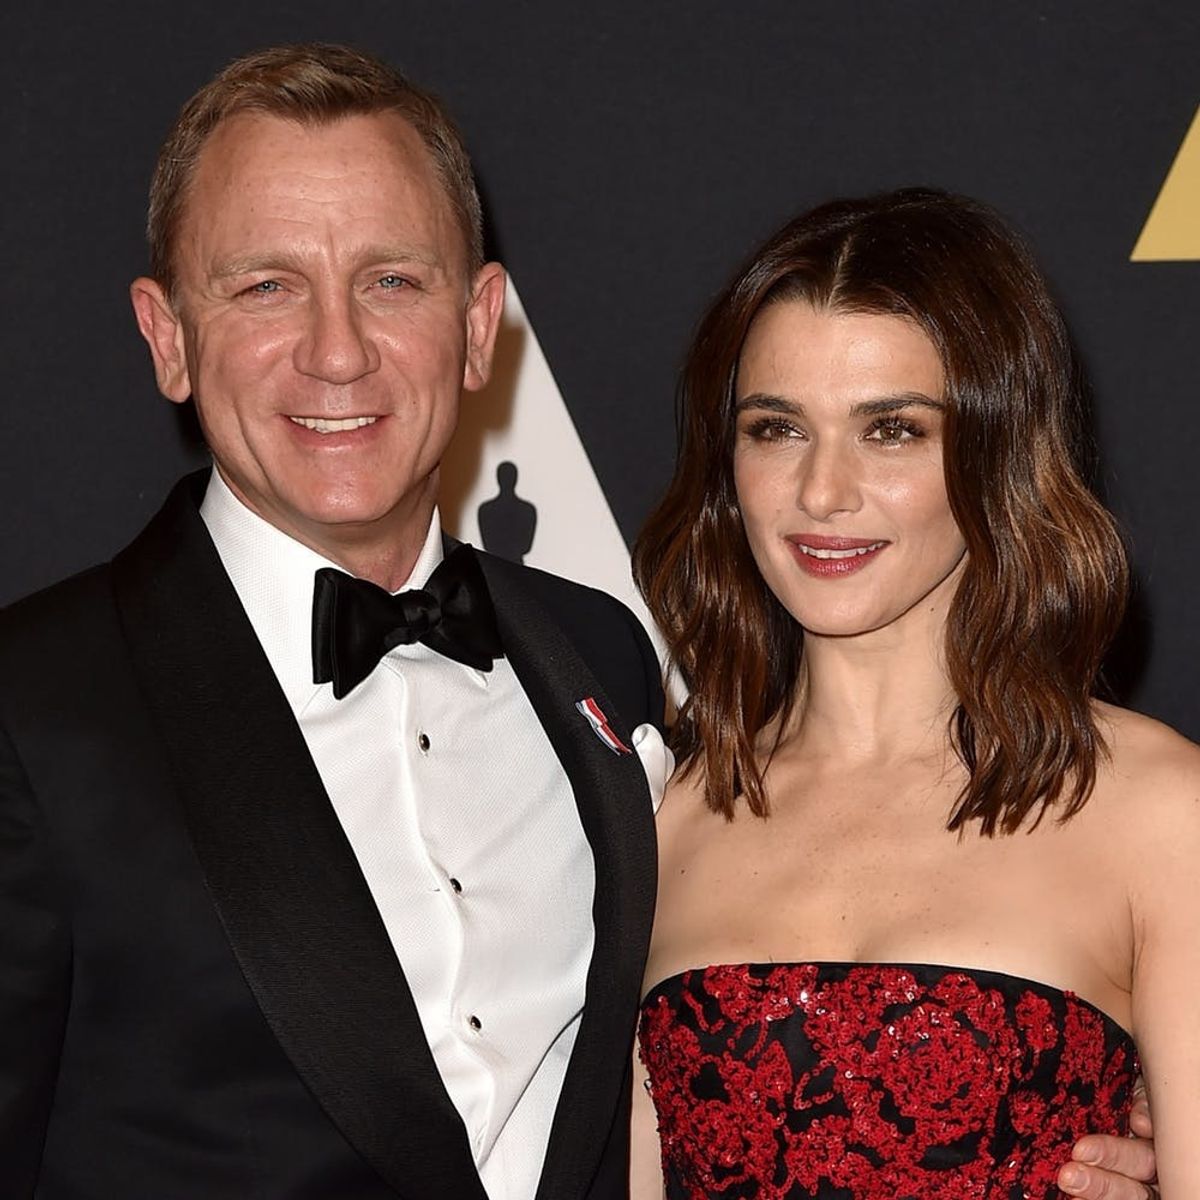 Rachel Weisz Is Pregnant and Expecting a Baby With Daniel Craig!